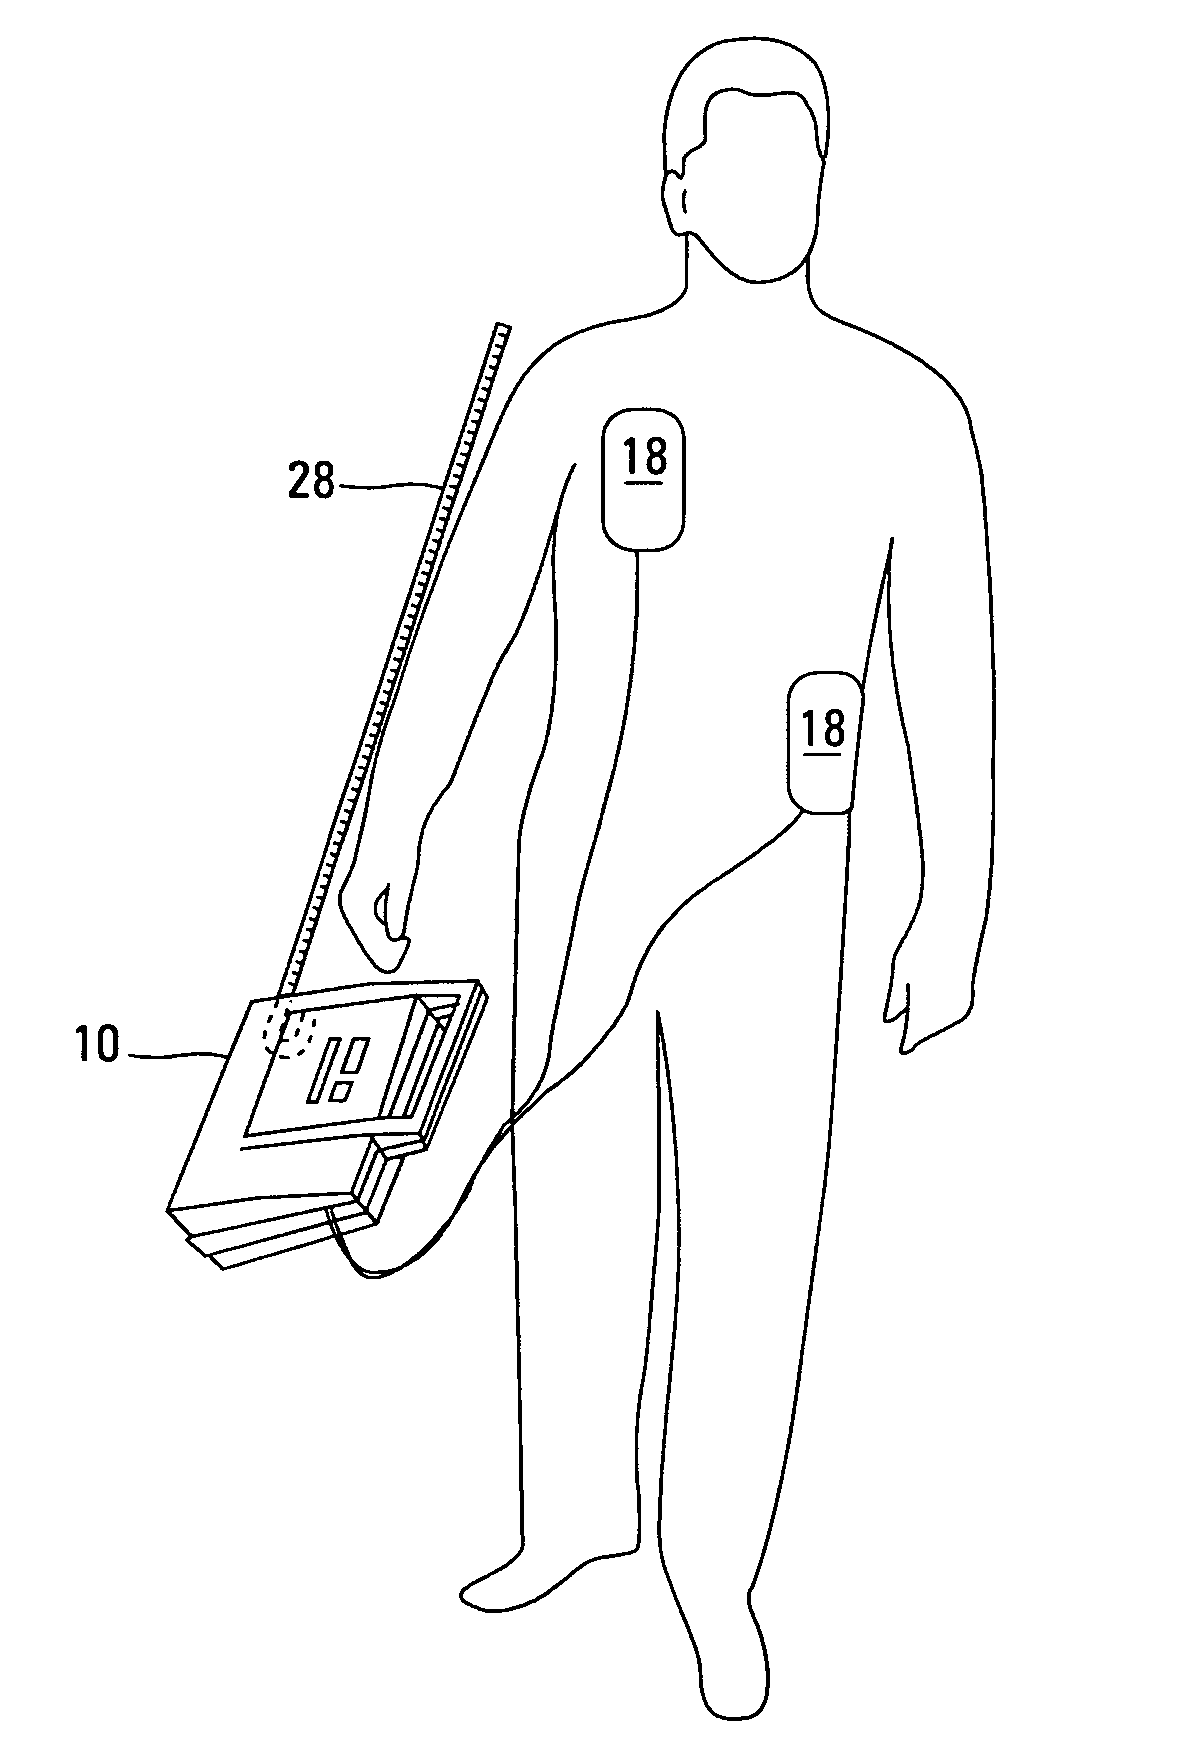 Automated external defibrillator with user interface for adult and pediatric applications